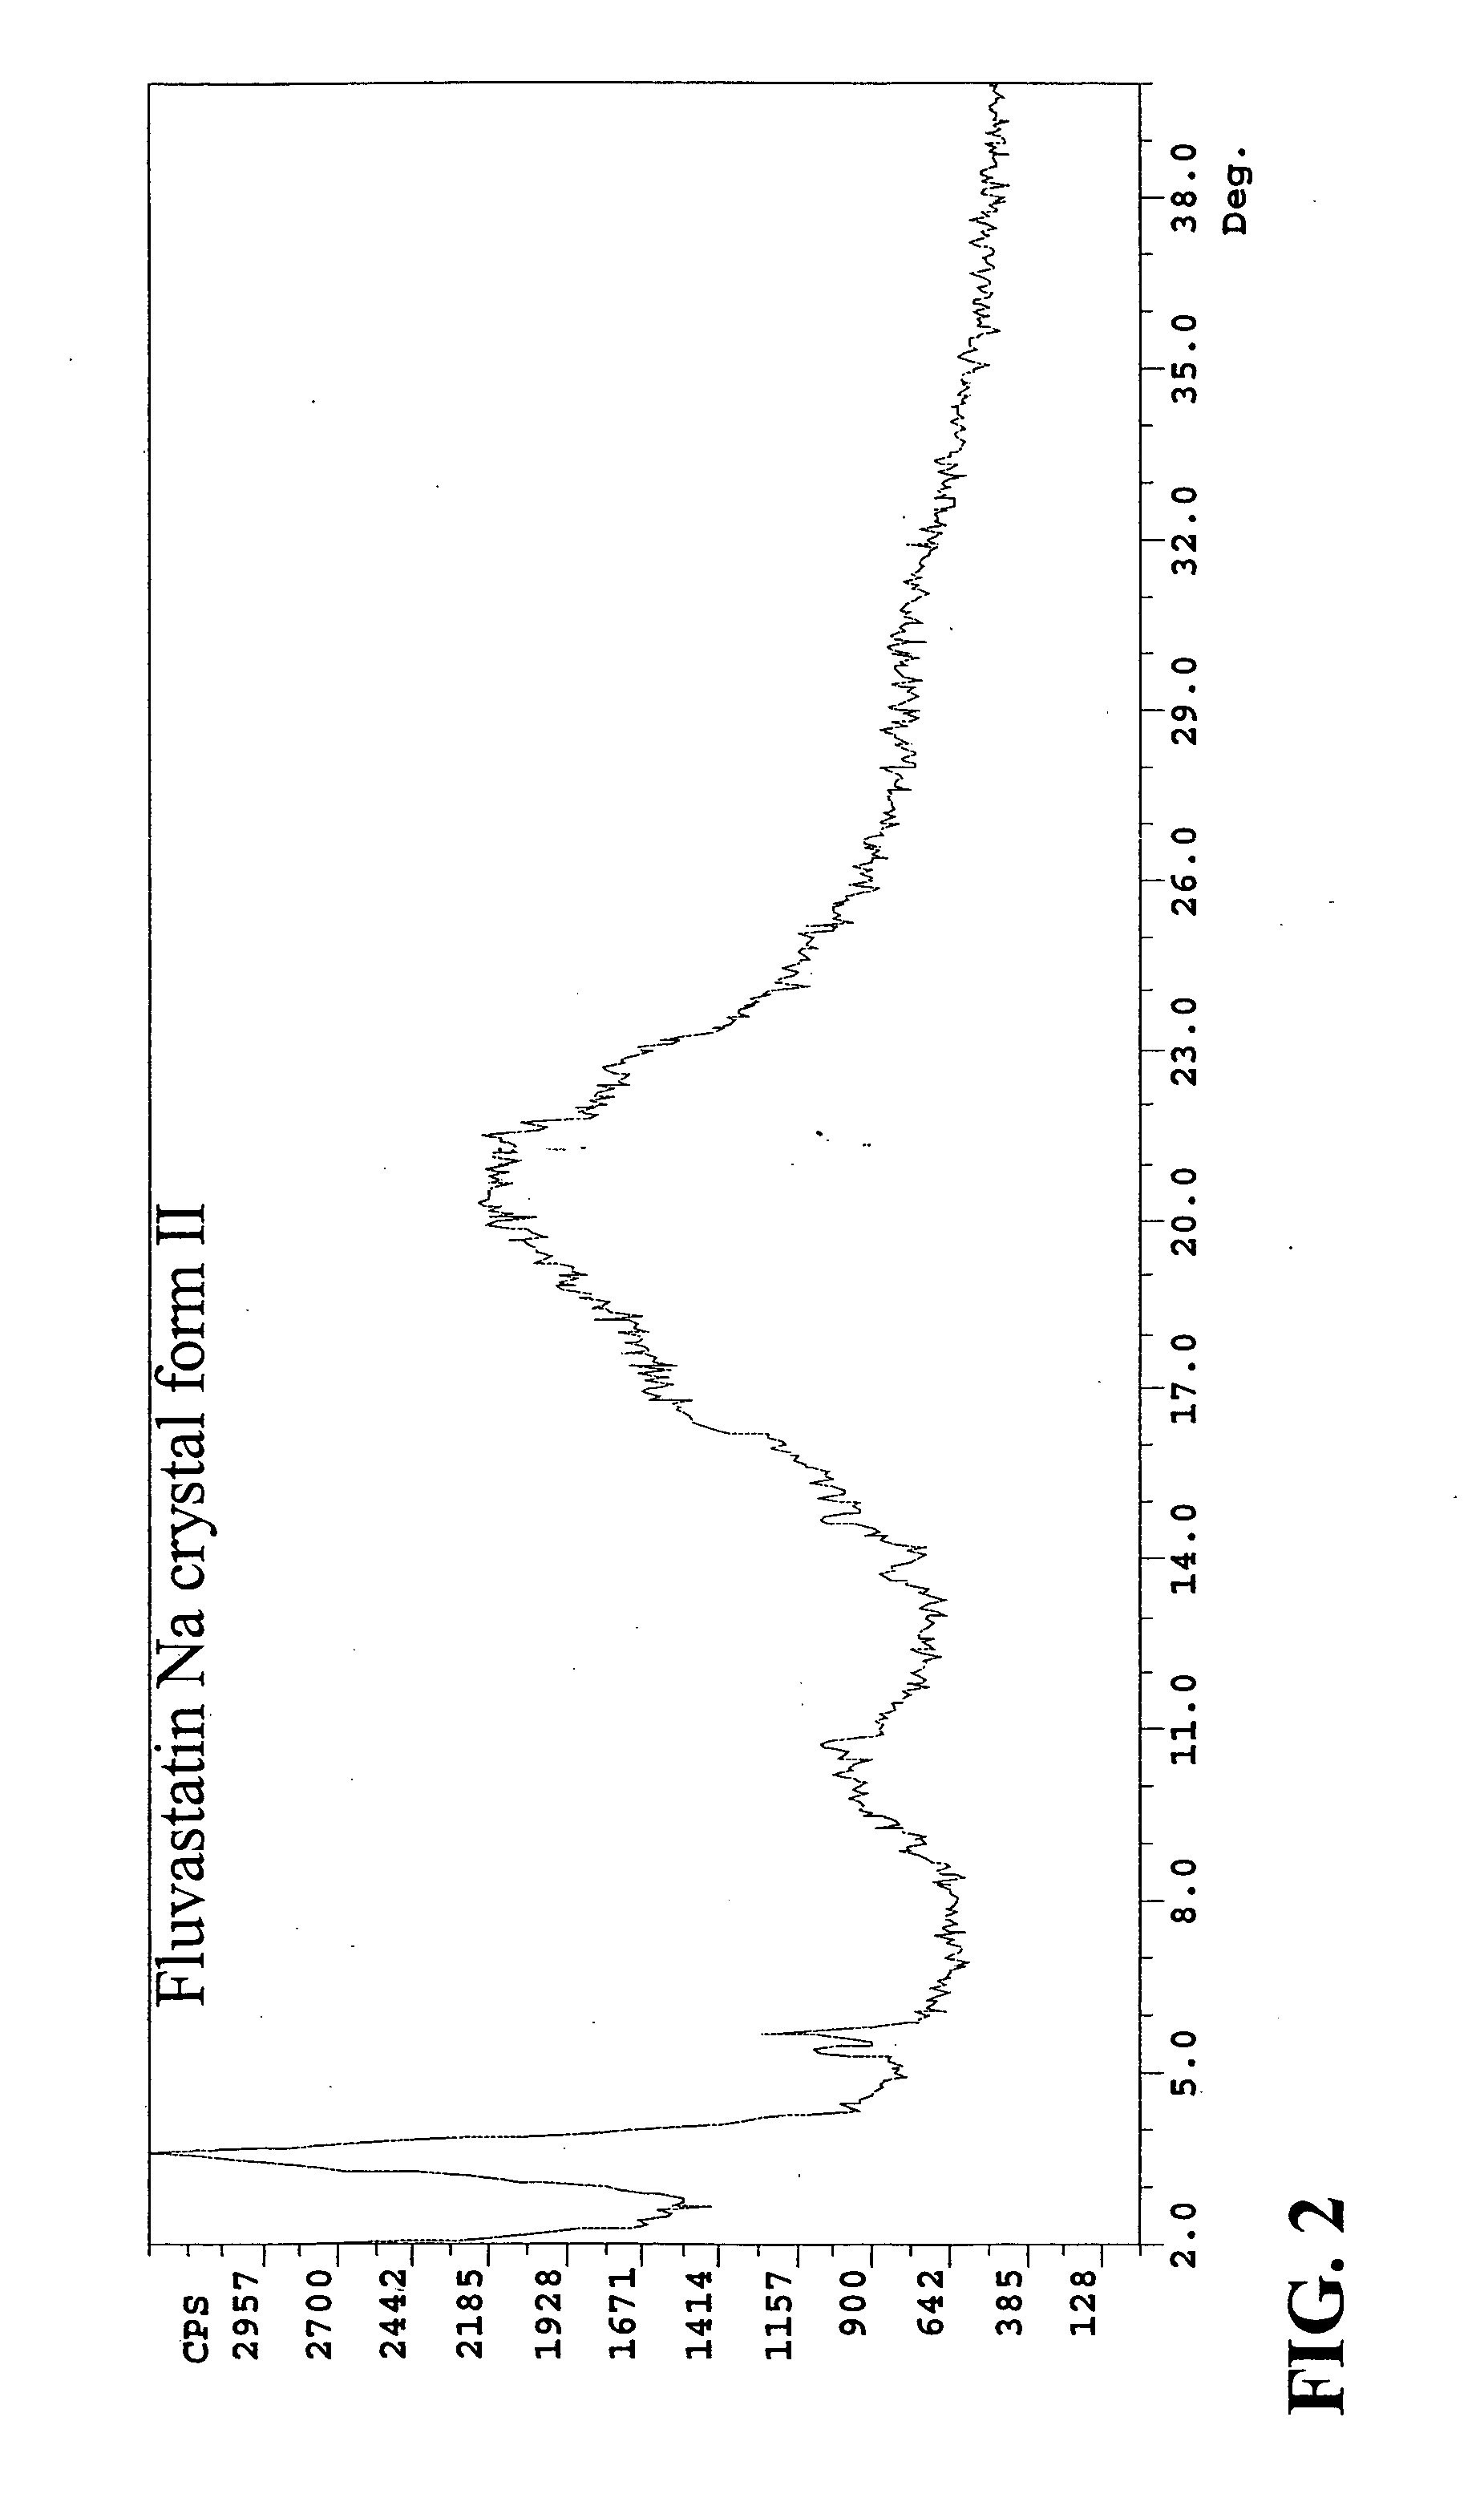 Eluvastatin sodium crystal forms, processes for preparing them, compositions containing them and methods of using them